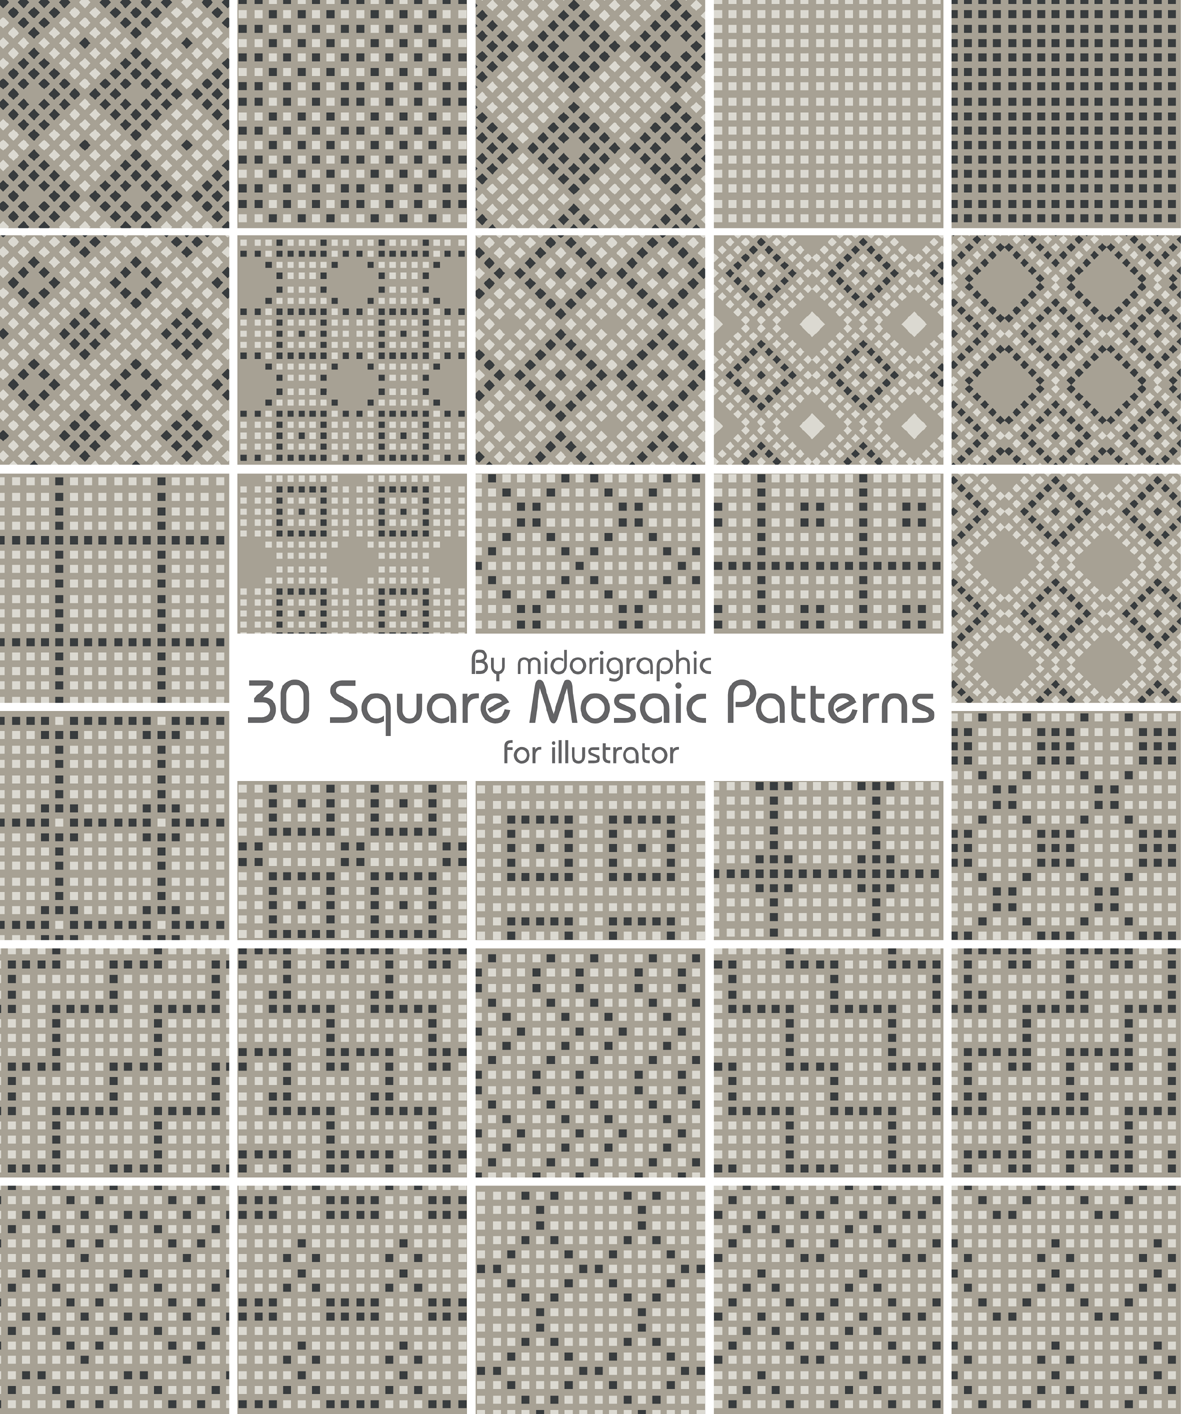 http://img08.deviantart.net/17a5/i/2012/065/a/9/mosaic_pattern_by_midorigraphic-d4rxa27.png